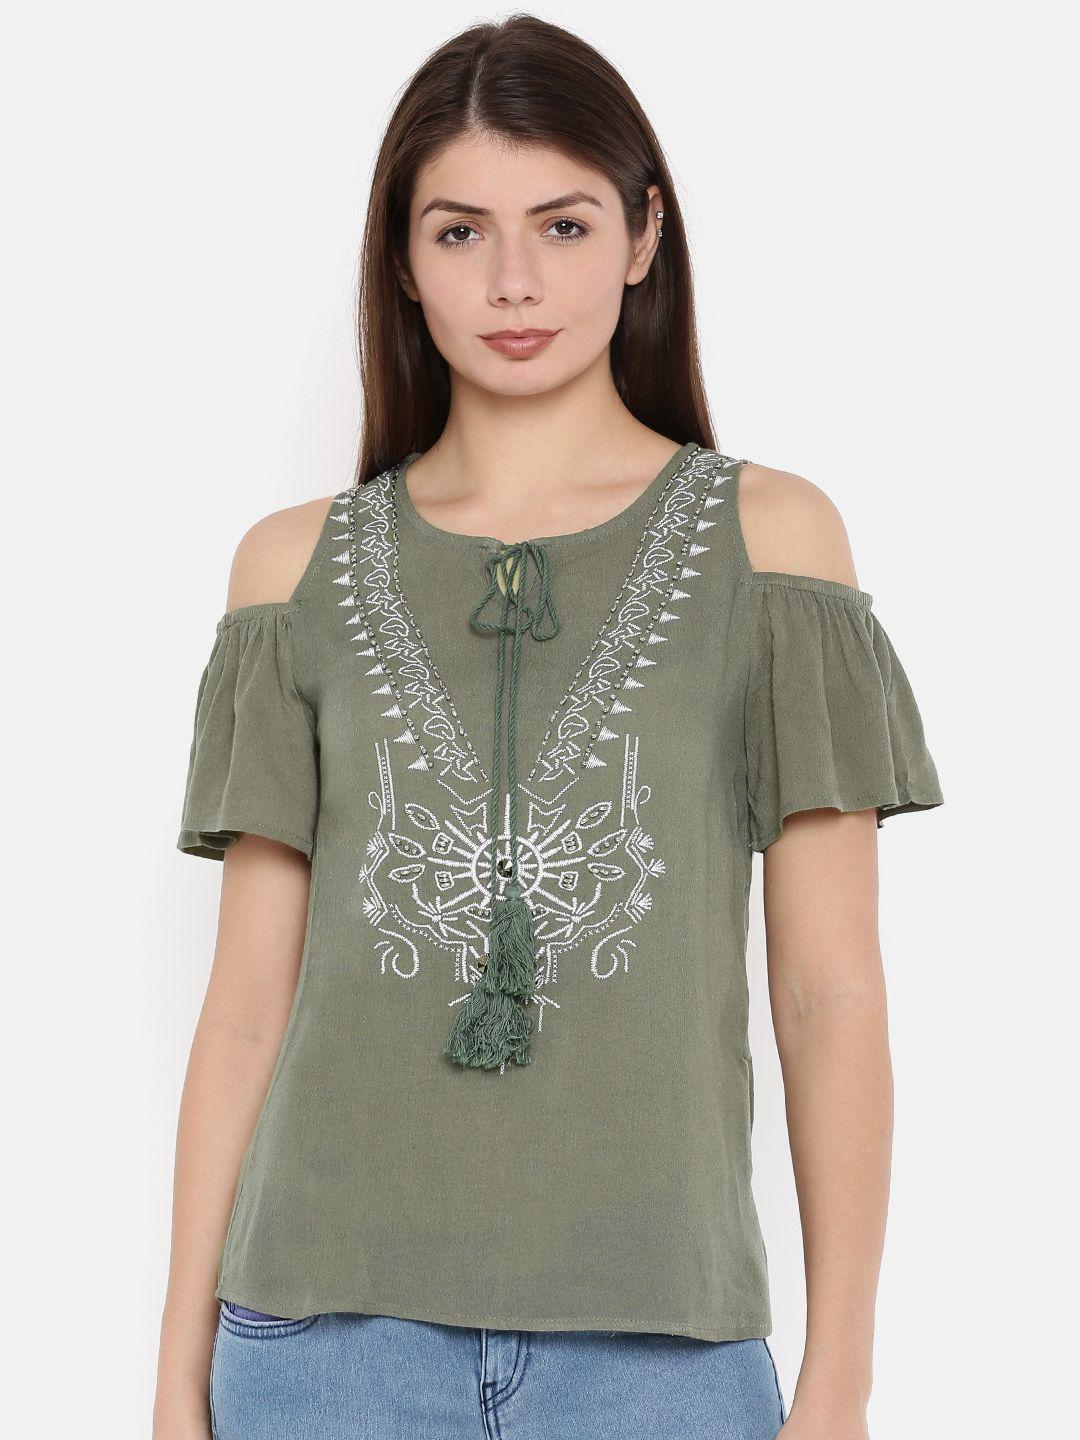 deal jeans women green printed cold-shoulder top